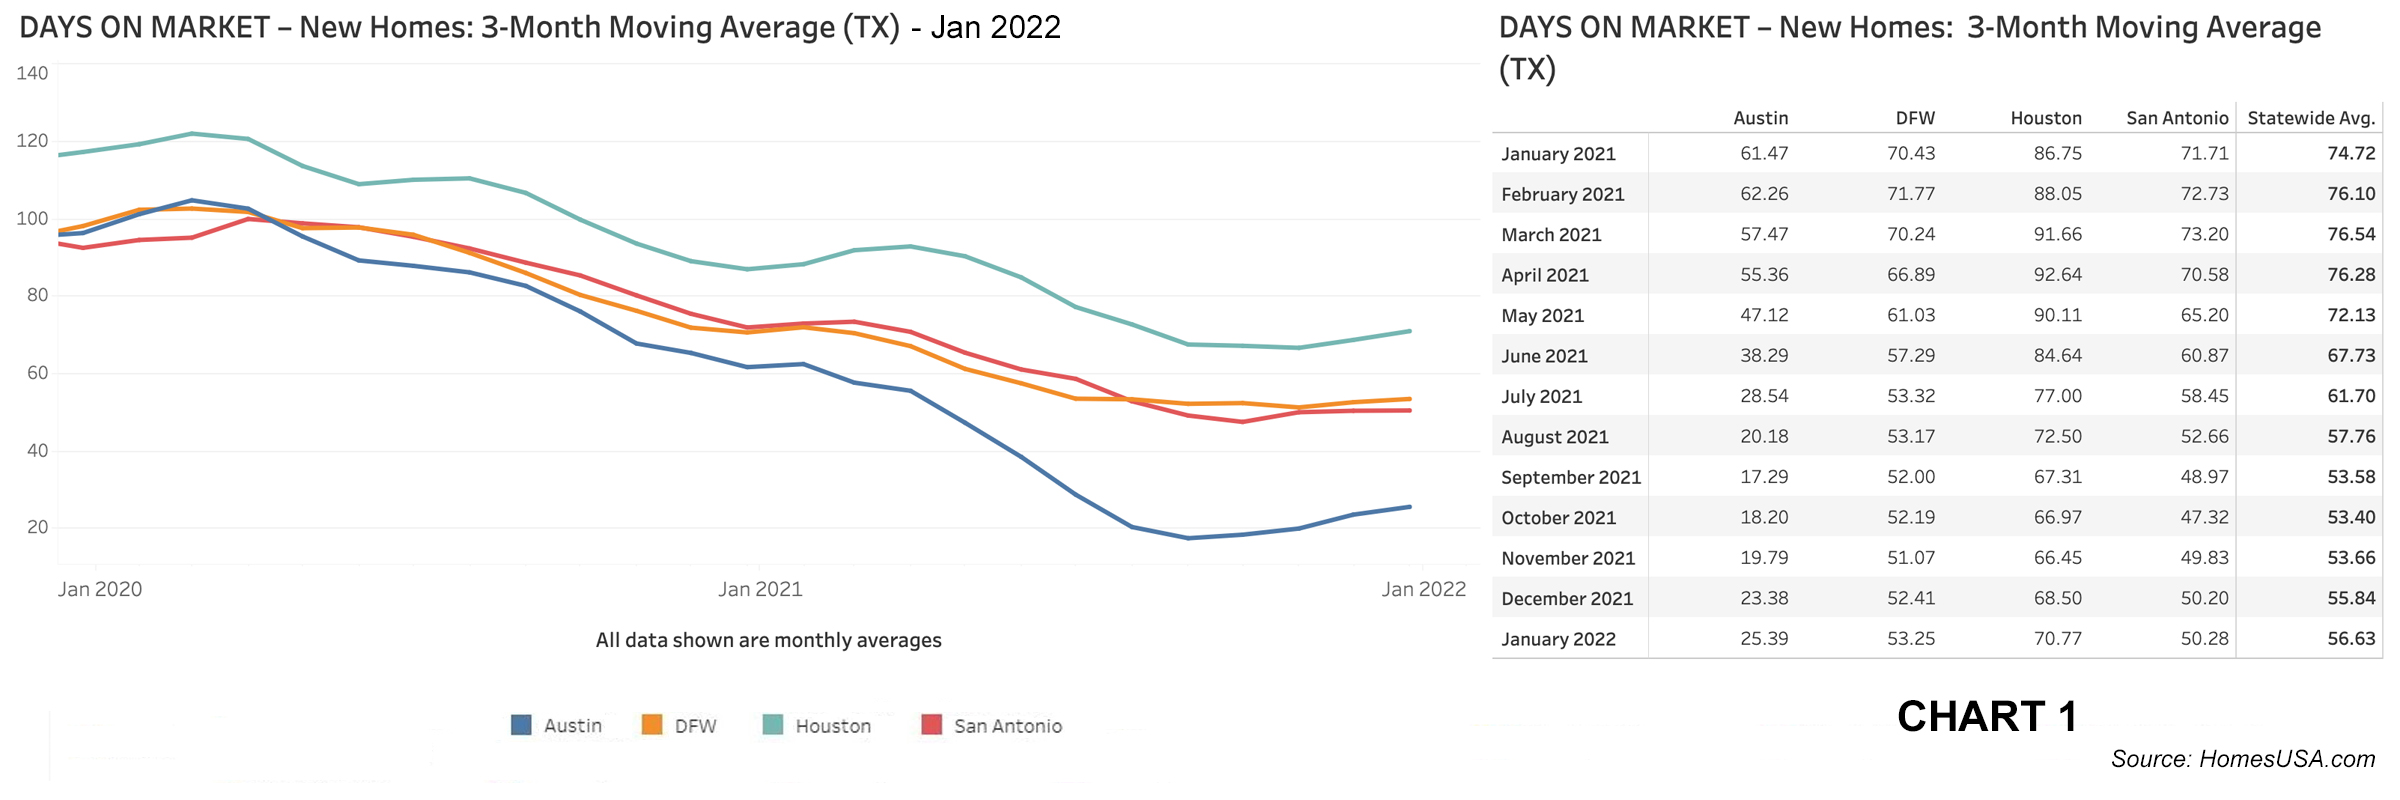 Chart 1: Texas New Homes Tracking - Days on Market – January 2022